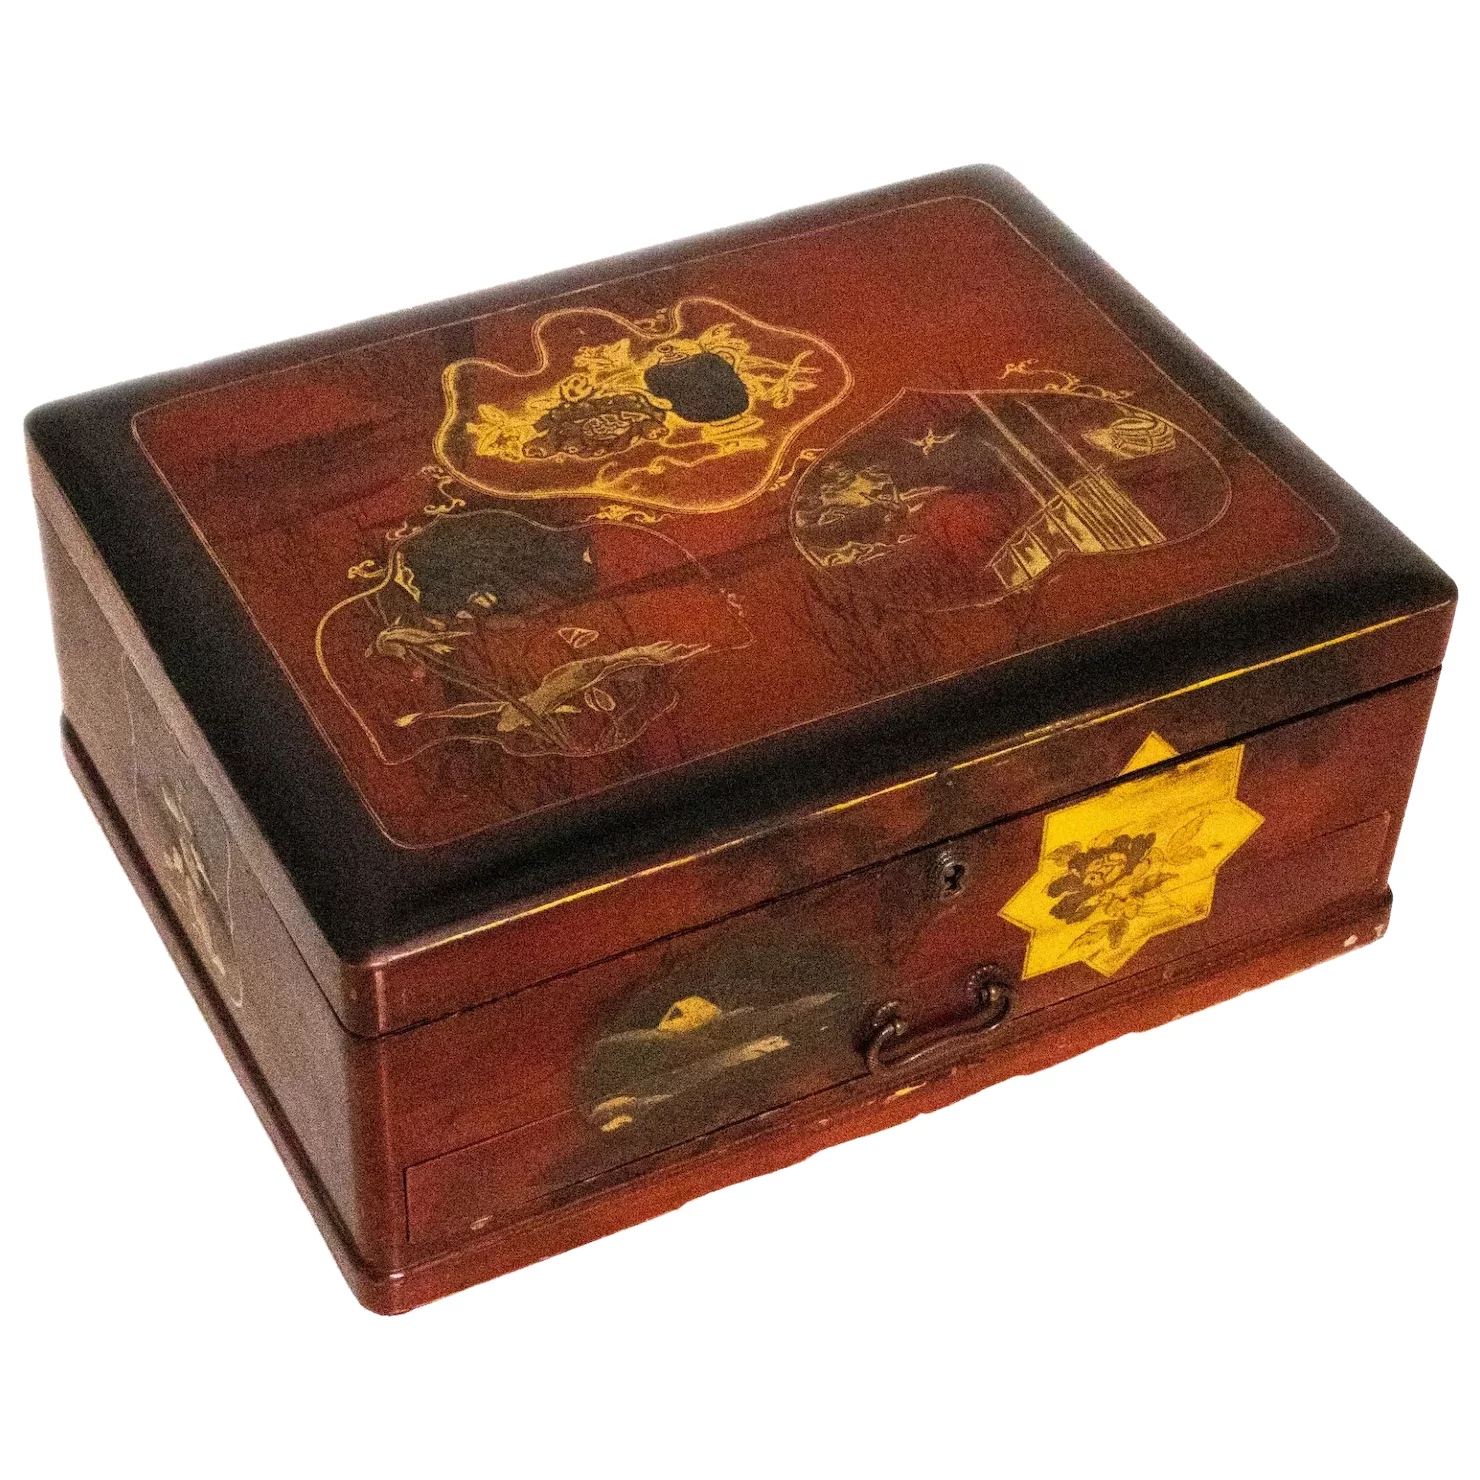 Lacquer jewelry boxes